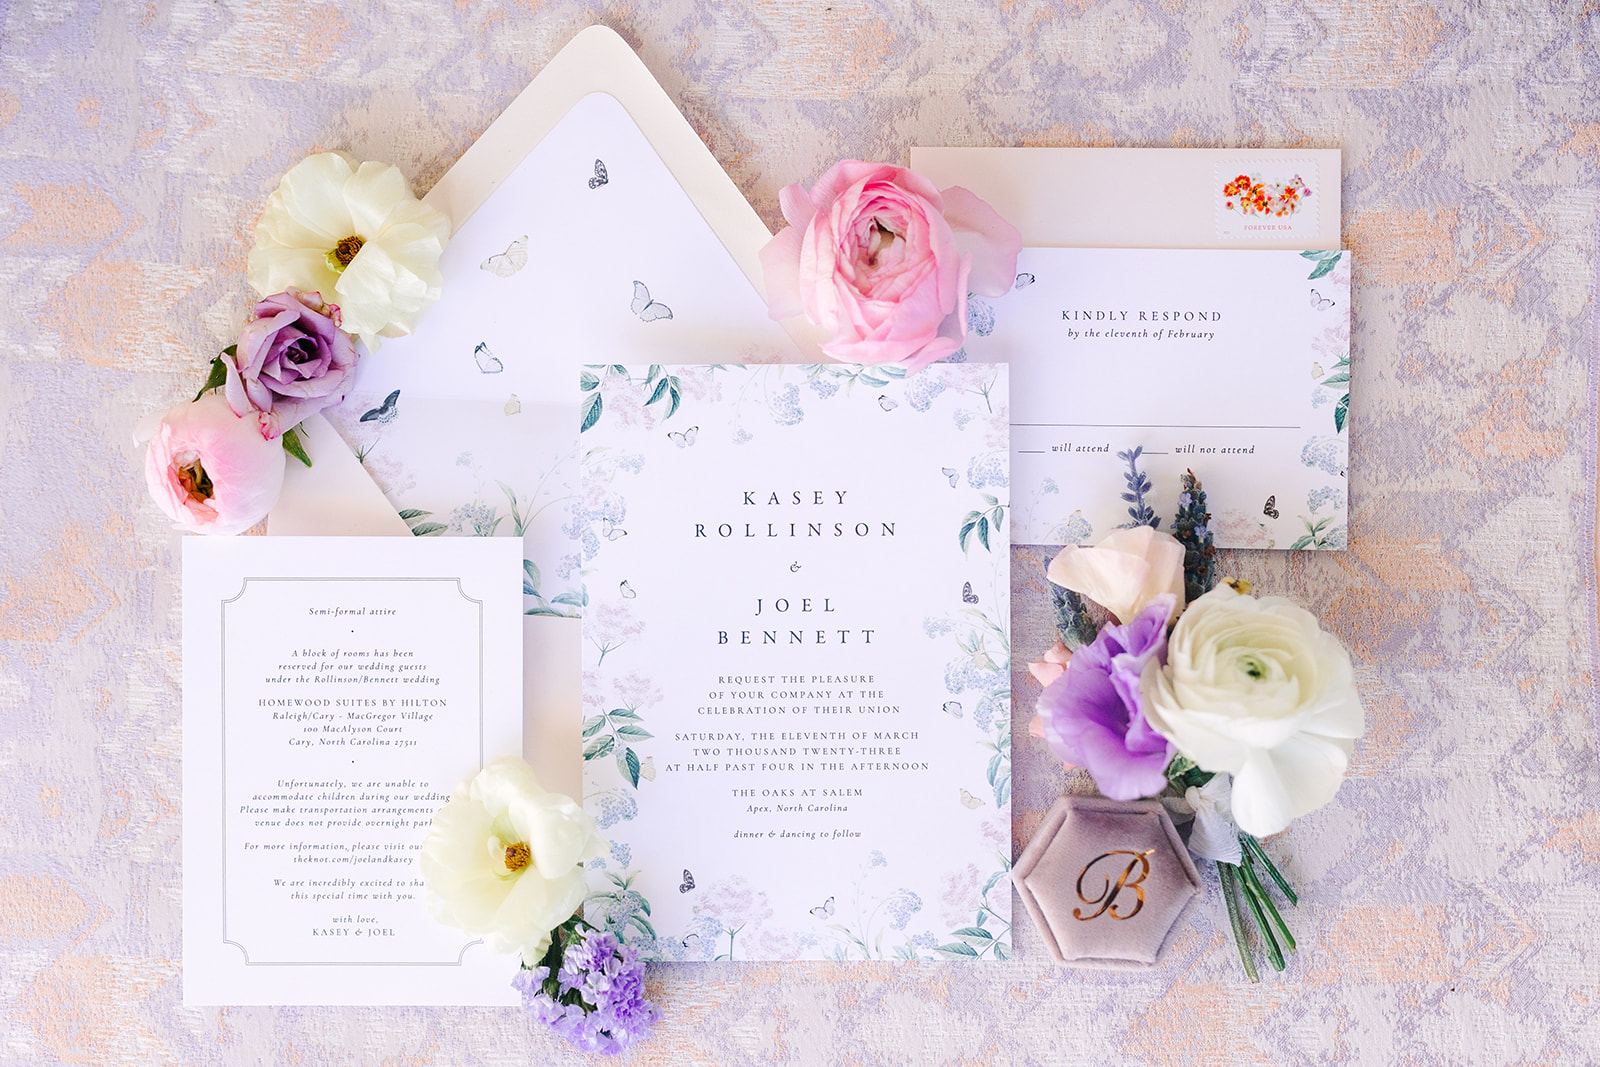 Flat lay detail of an invitation suite